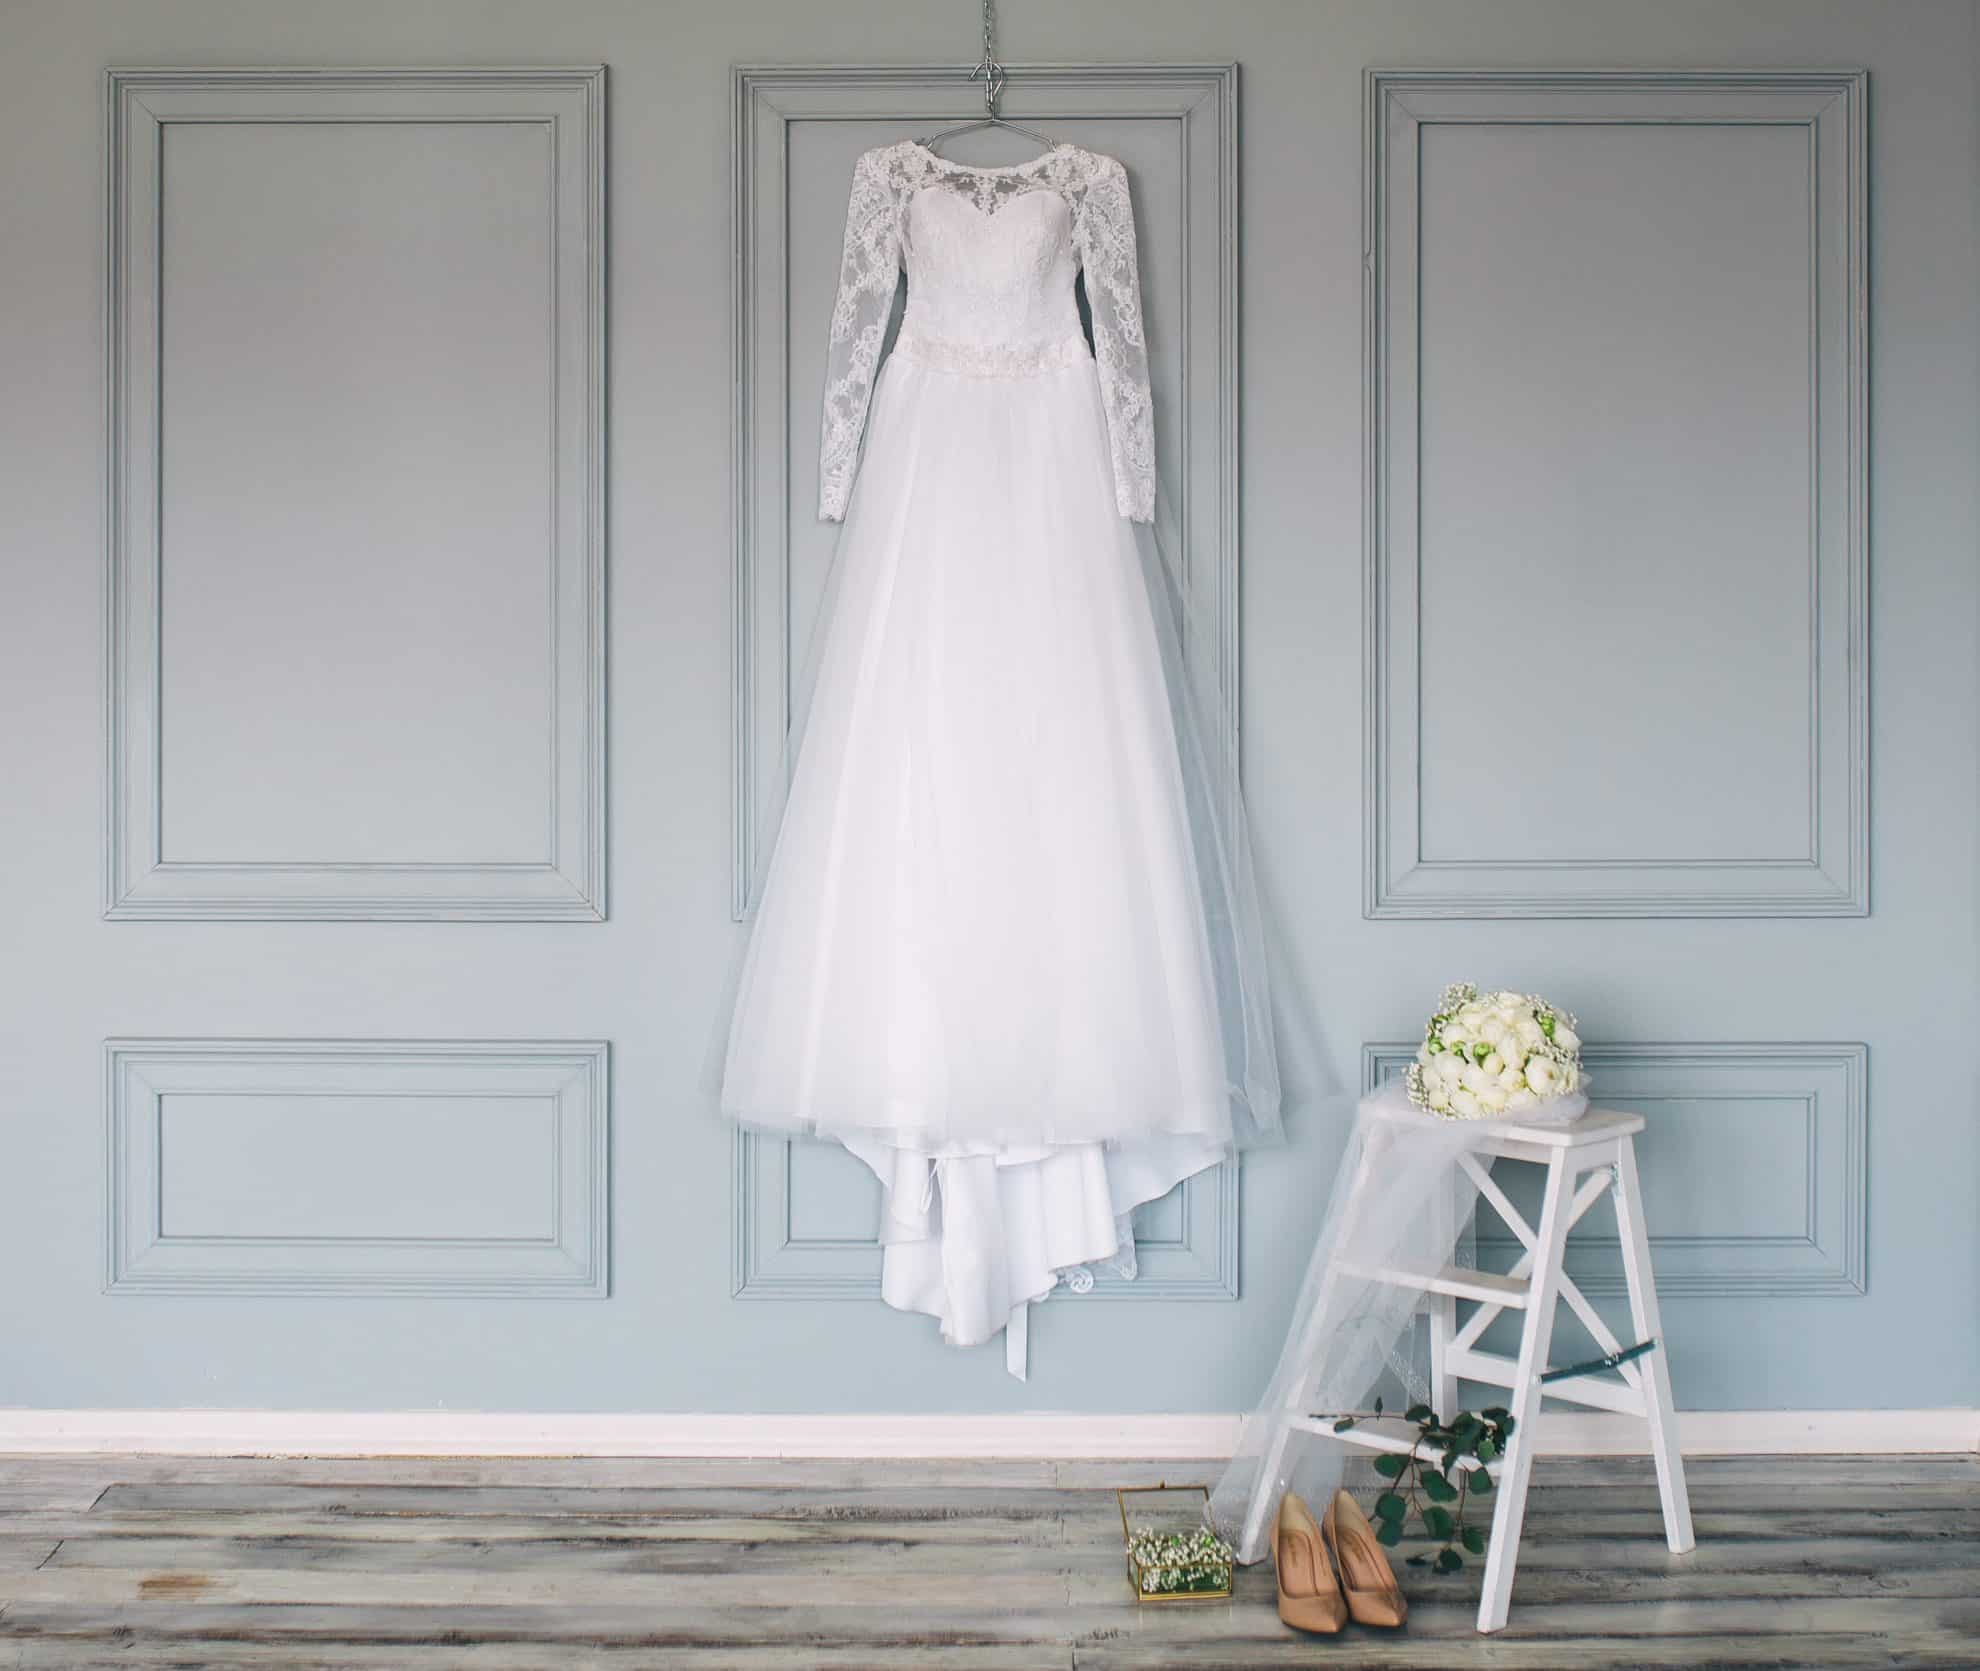 What To Include In Your Wedding Overnight Bag - wedding dress hanging  up